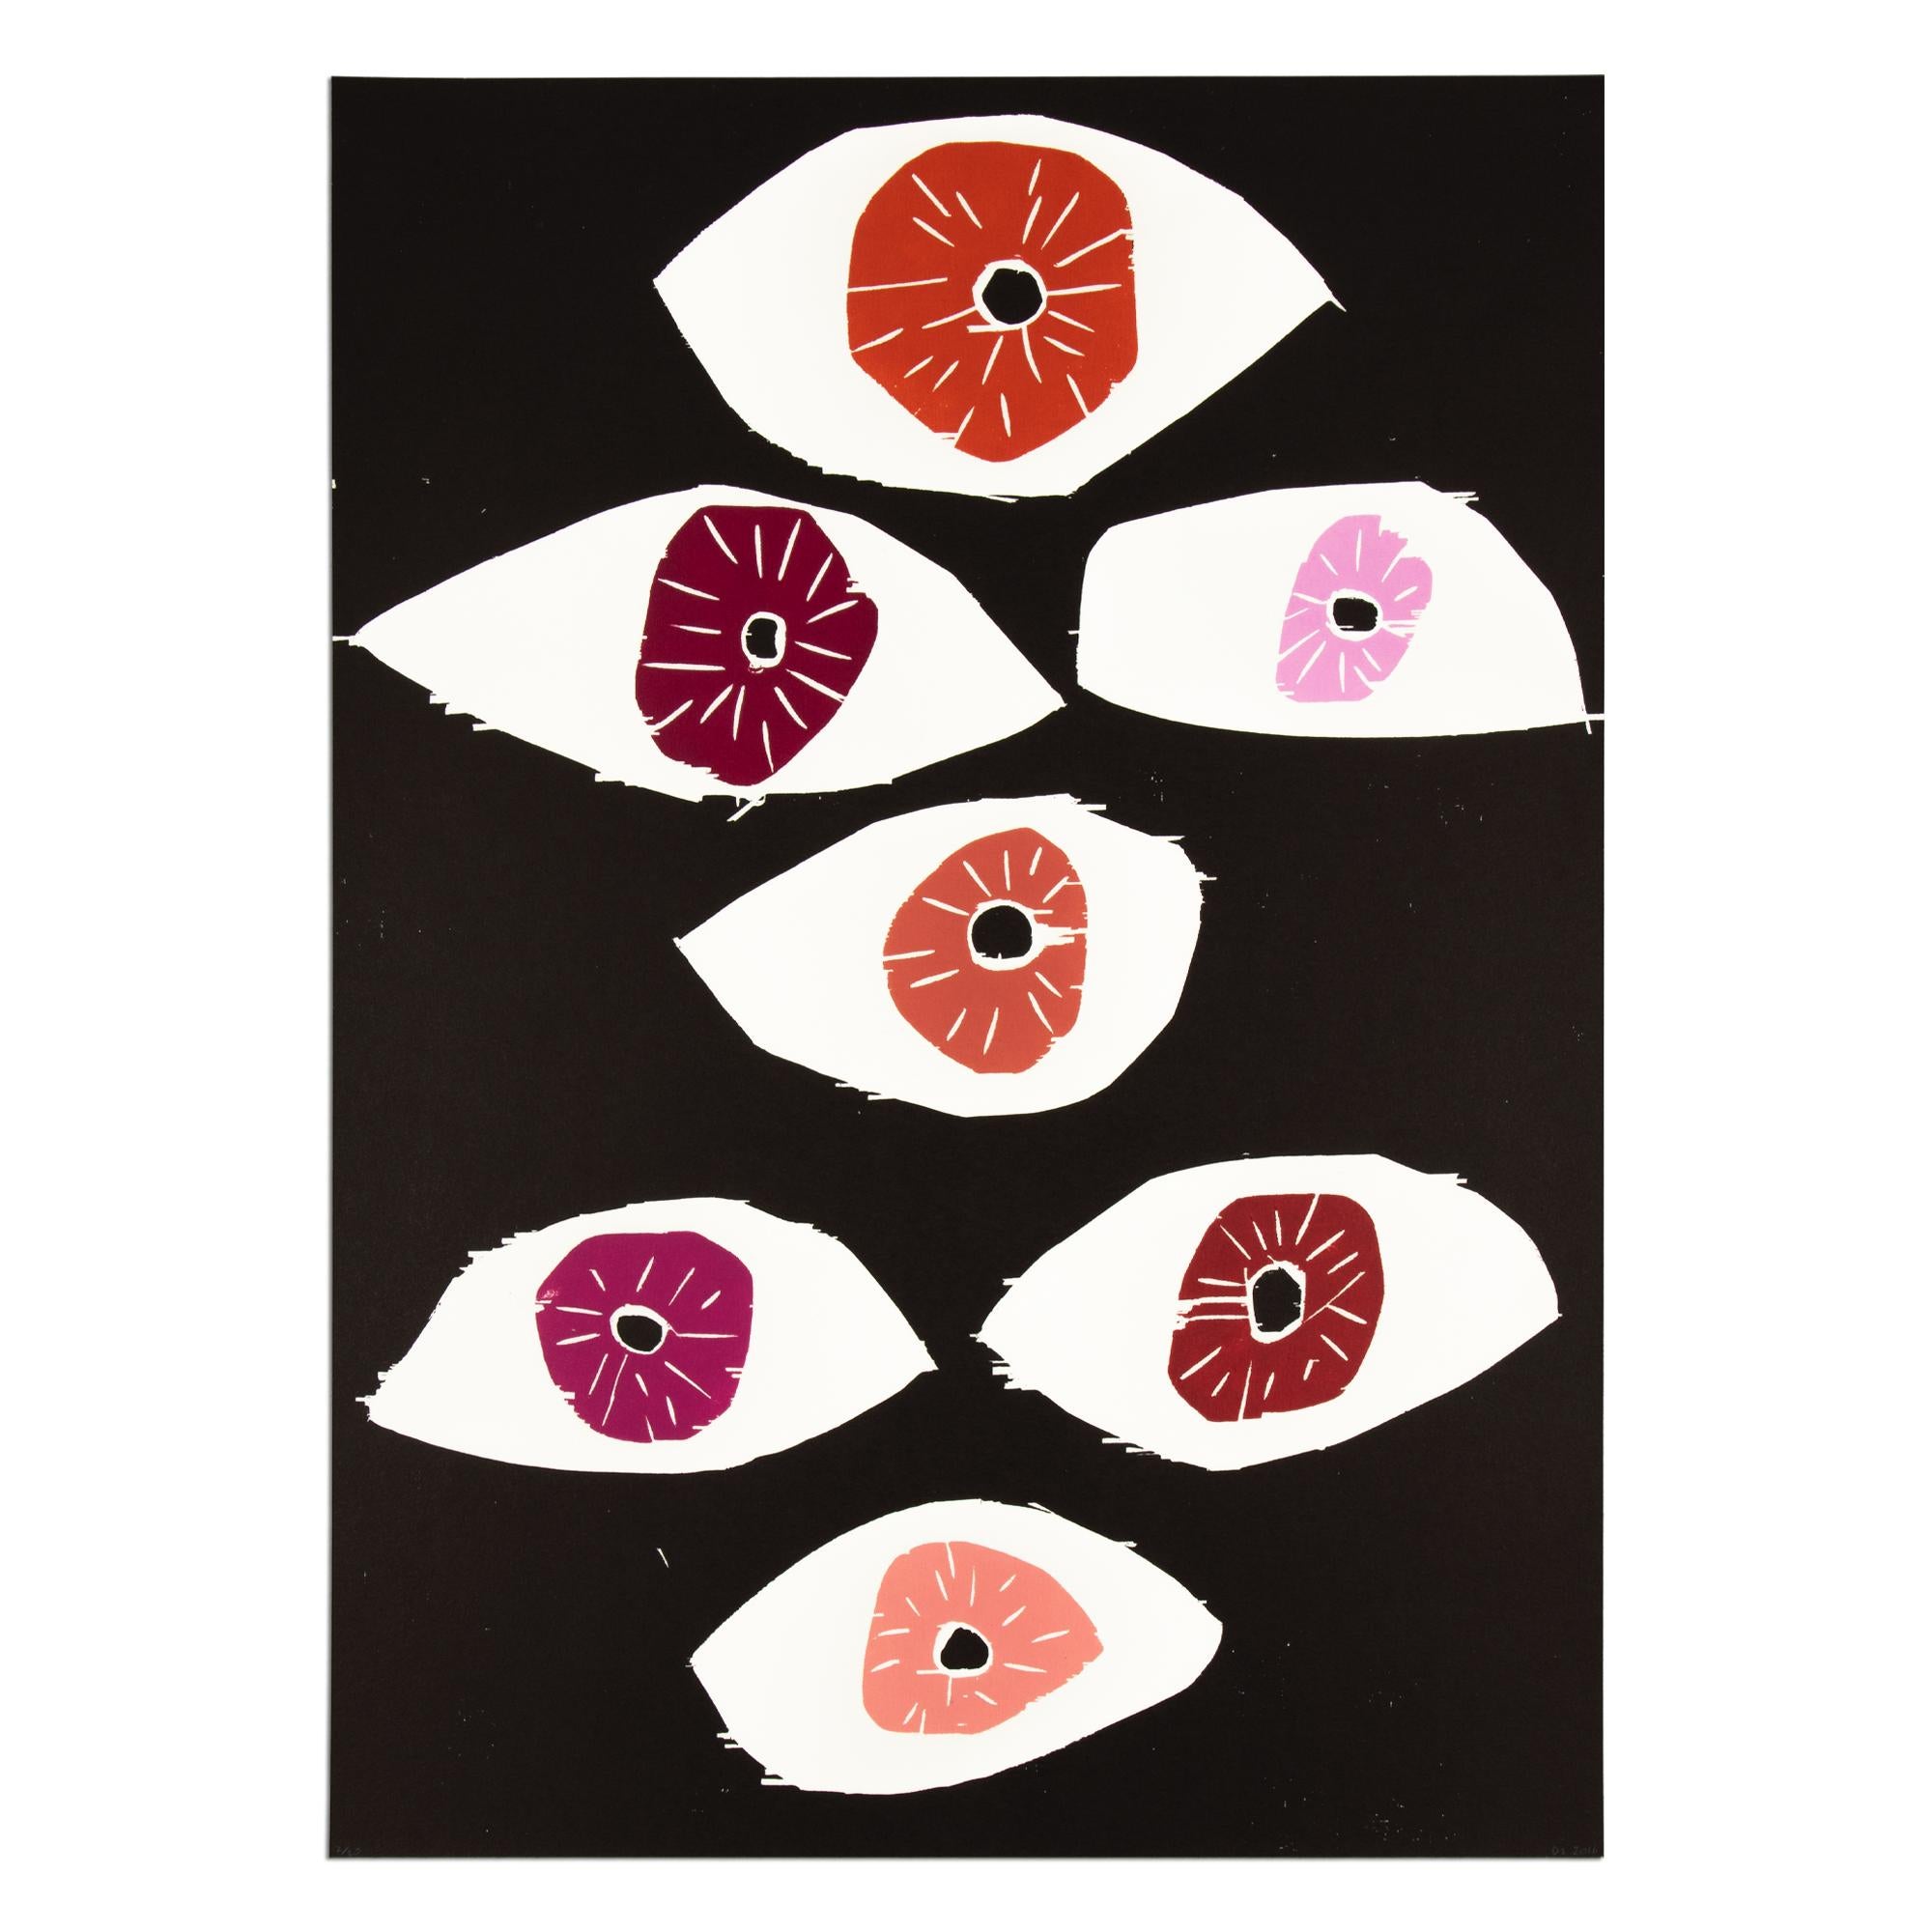 David Shrigley (English, b. 1968)
Eyes, 2016
Medium: Woodcut on paper
Dimensions: 70 x 50 cm
Edition of 20: Hand-signed and numbered
Condition: Mint